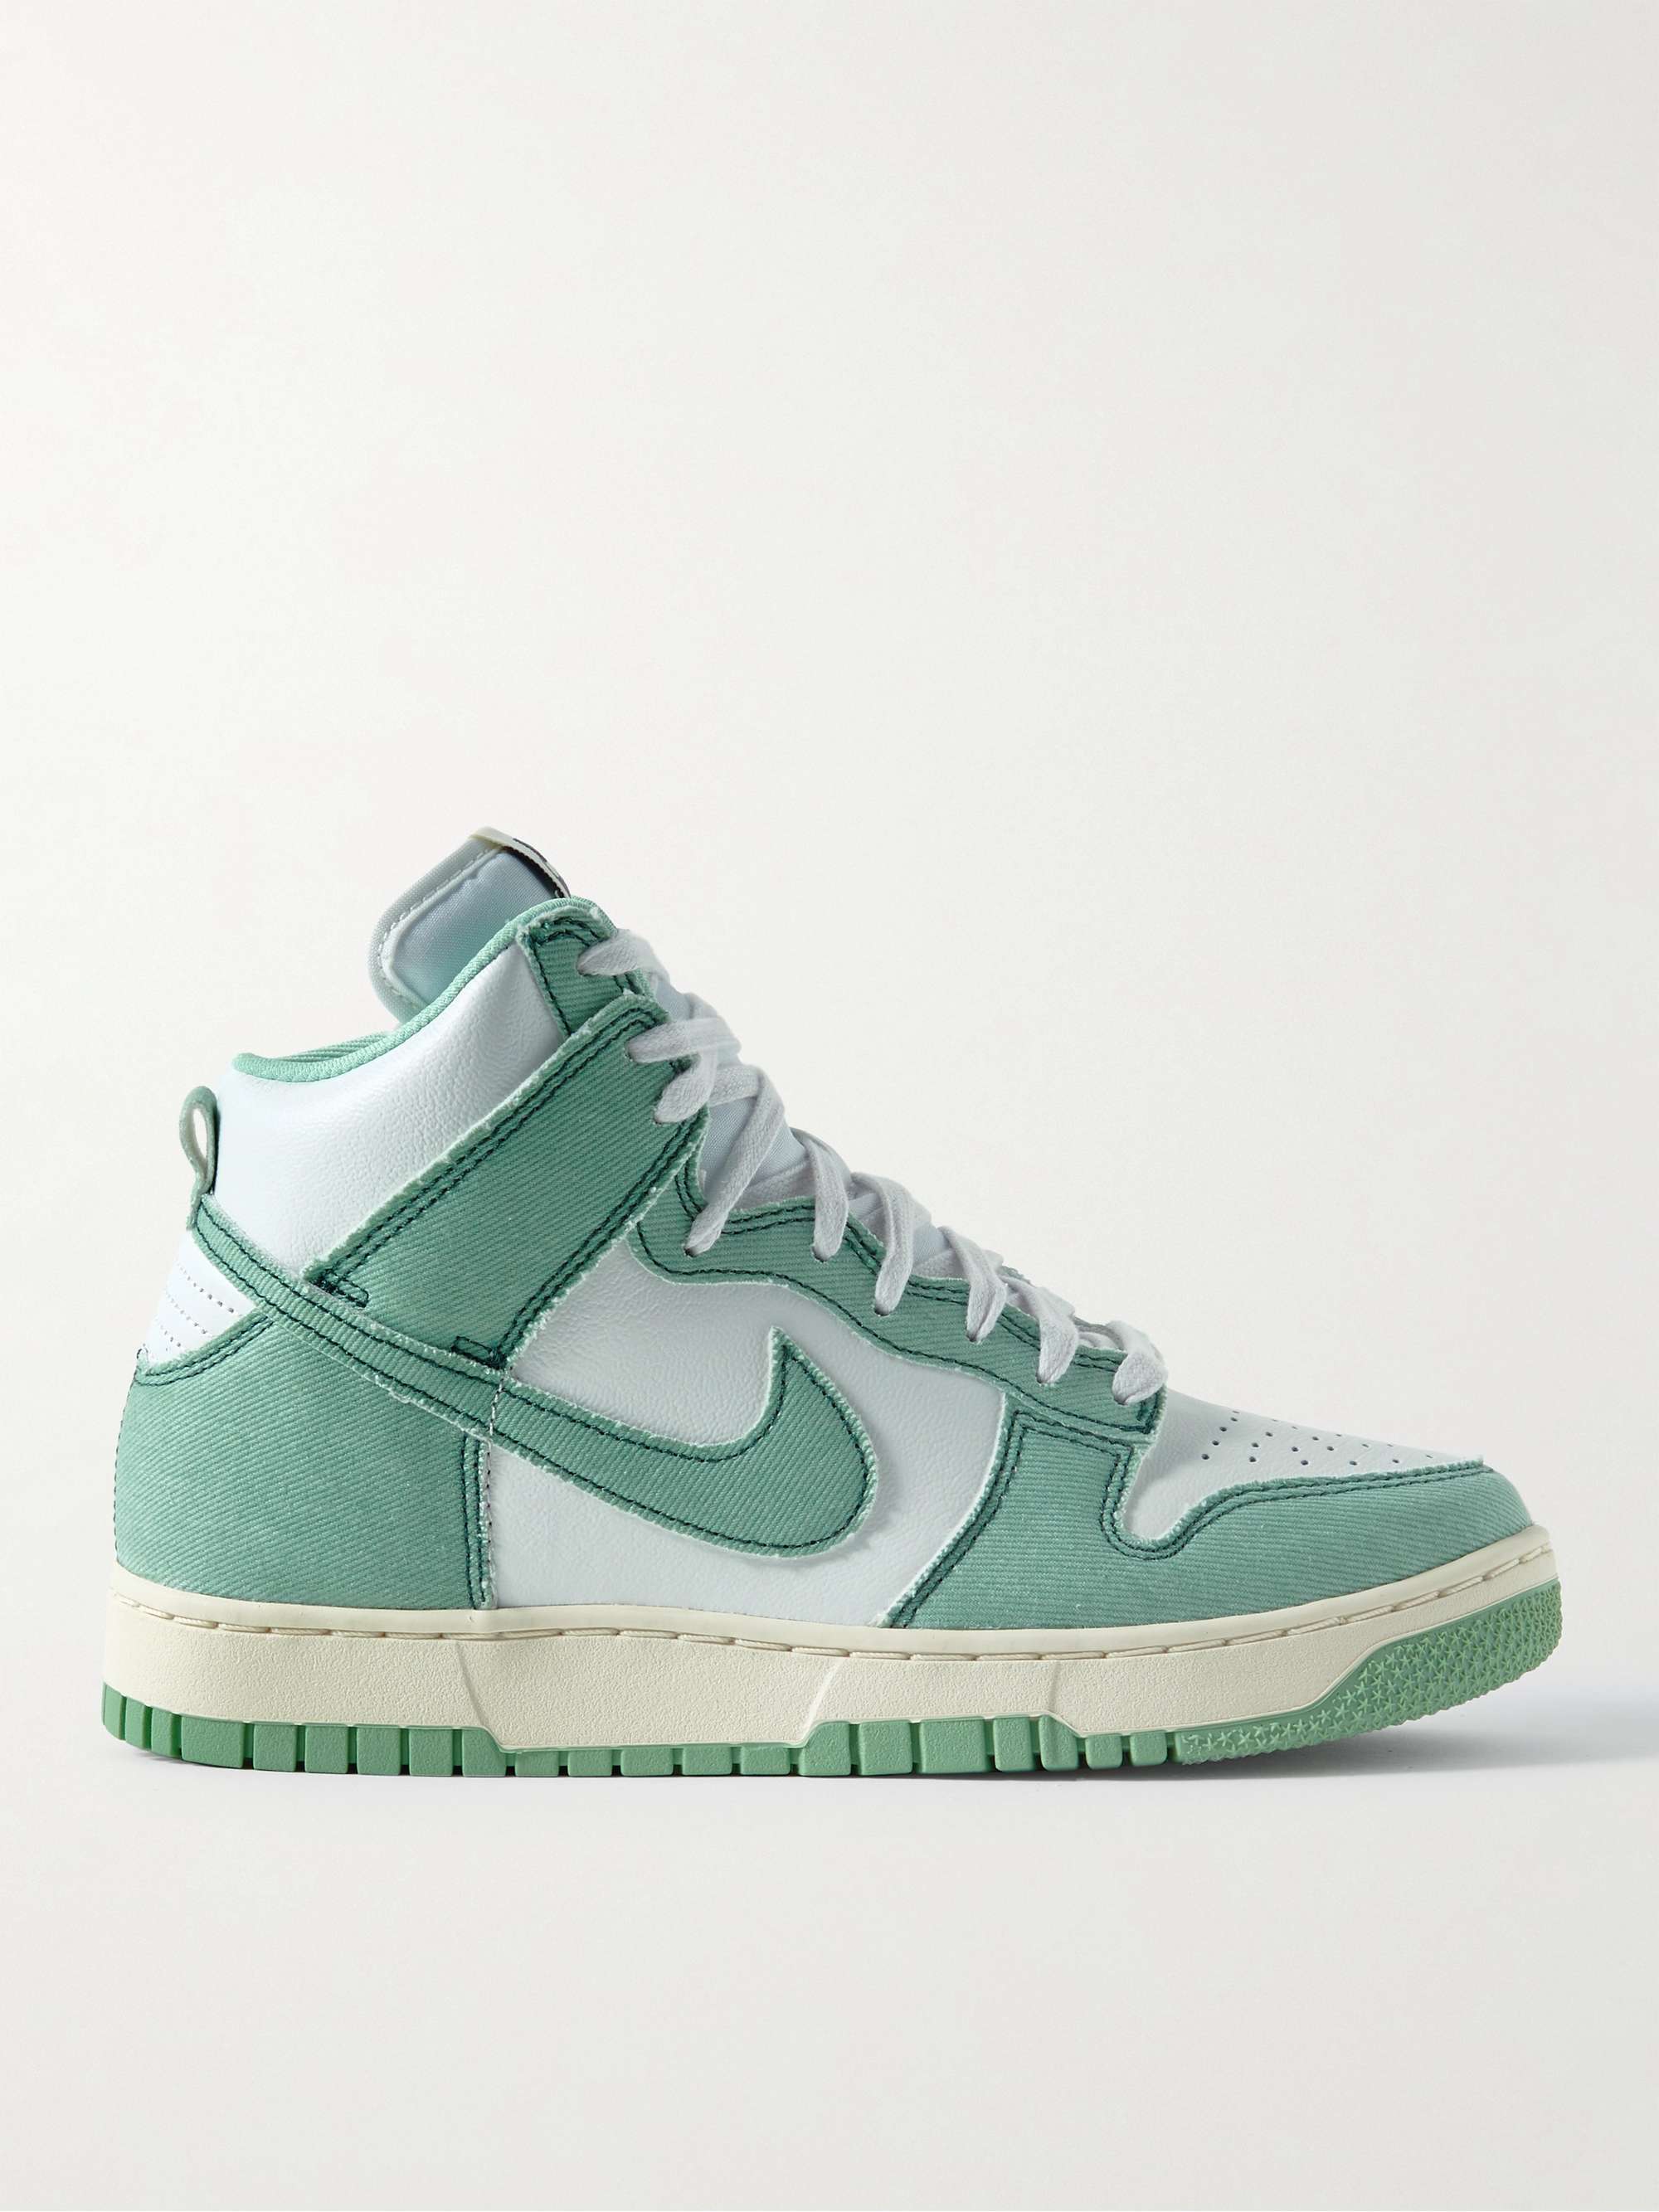 NIKE Dunk Hi 1985 Denim and Leather High-Top Sneakers for Men | MR PORTER